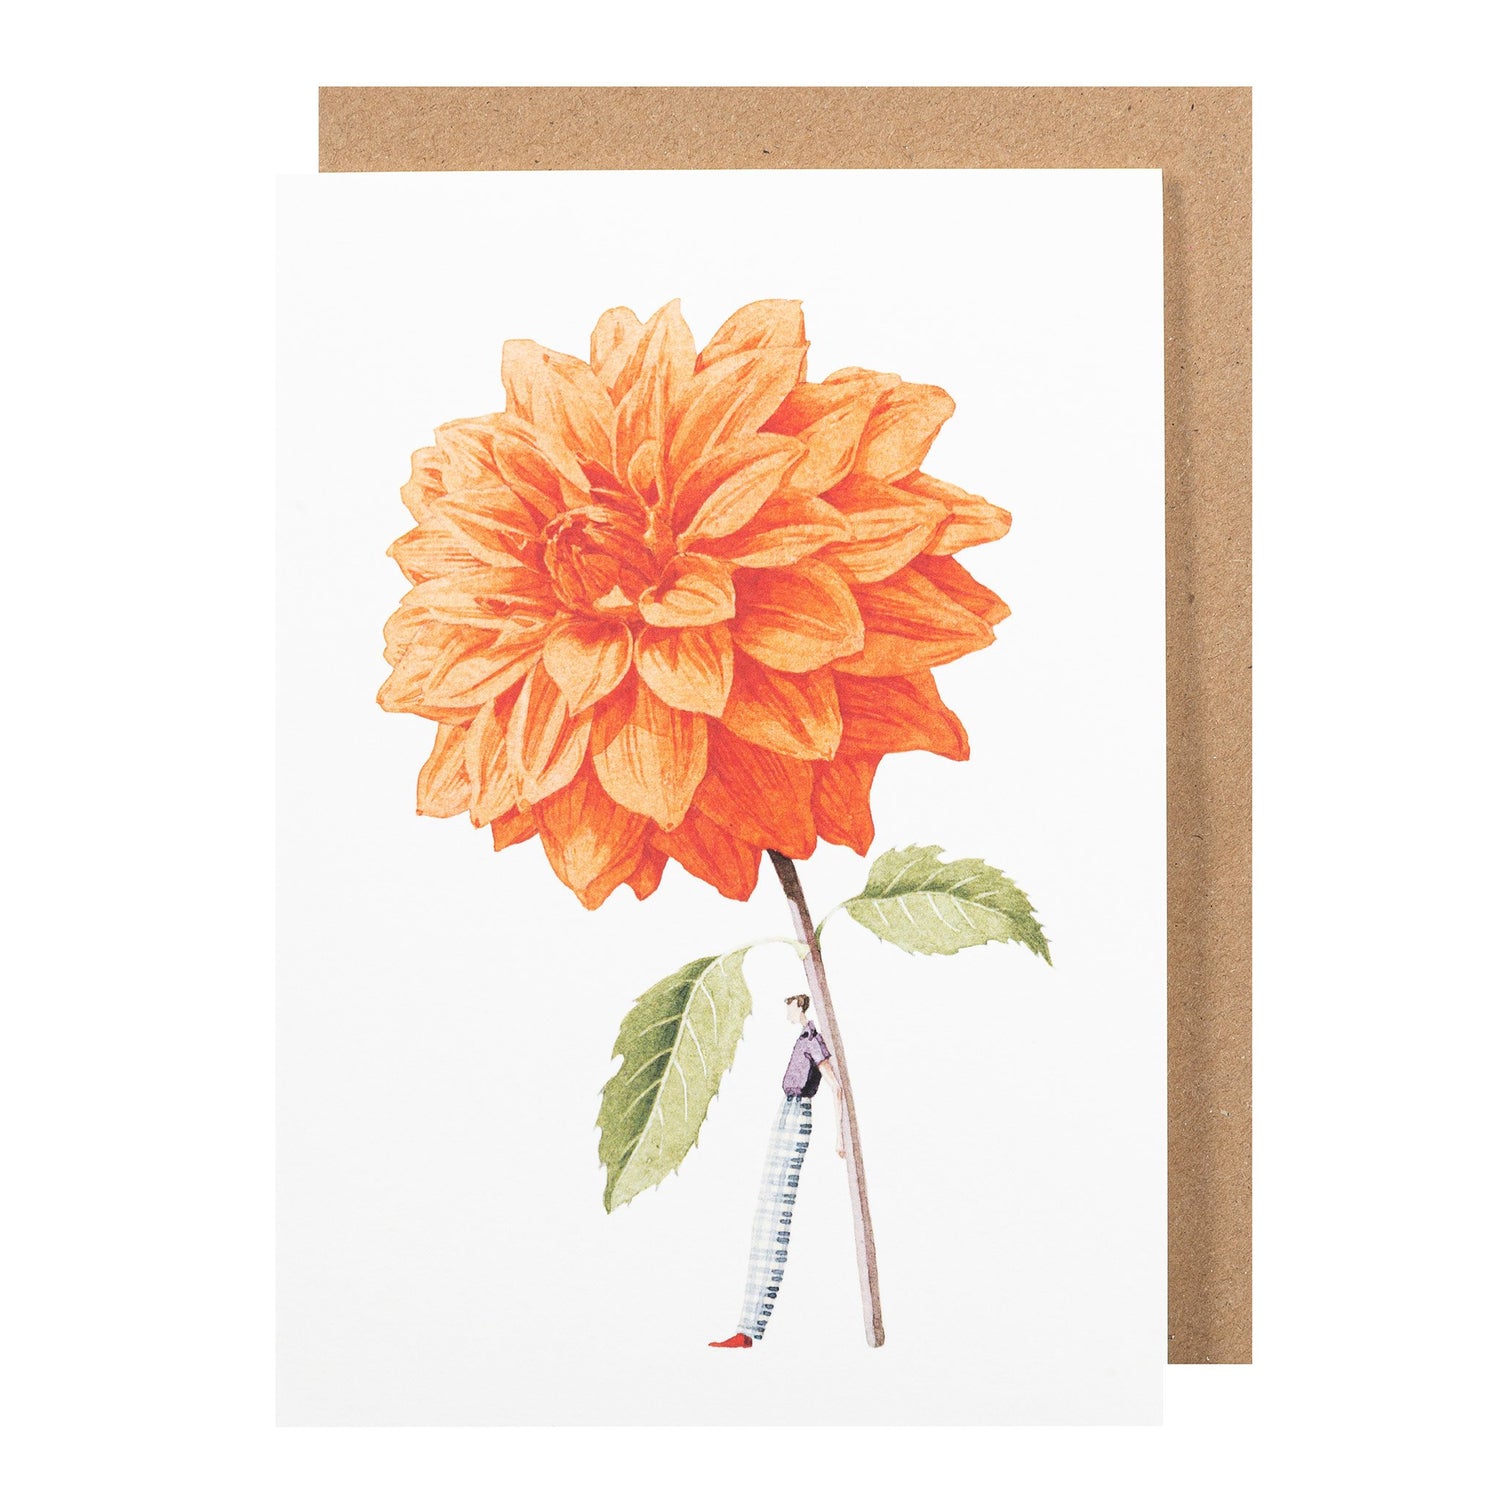 environmentally sustainable paper, compostable packaging, recycled paper, made in england, illustration, dahlia, orange dahlia